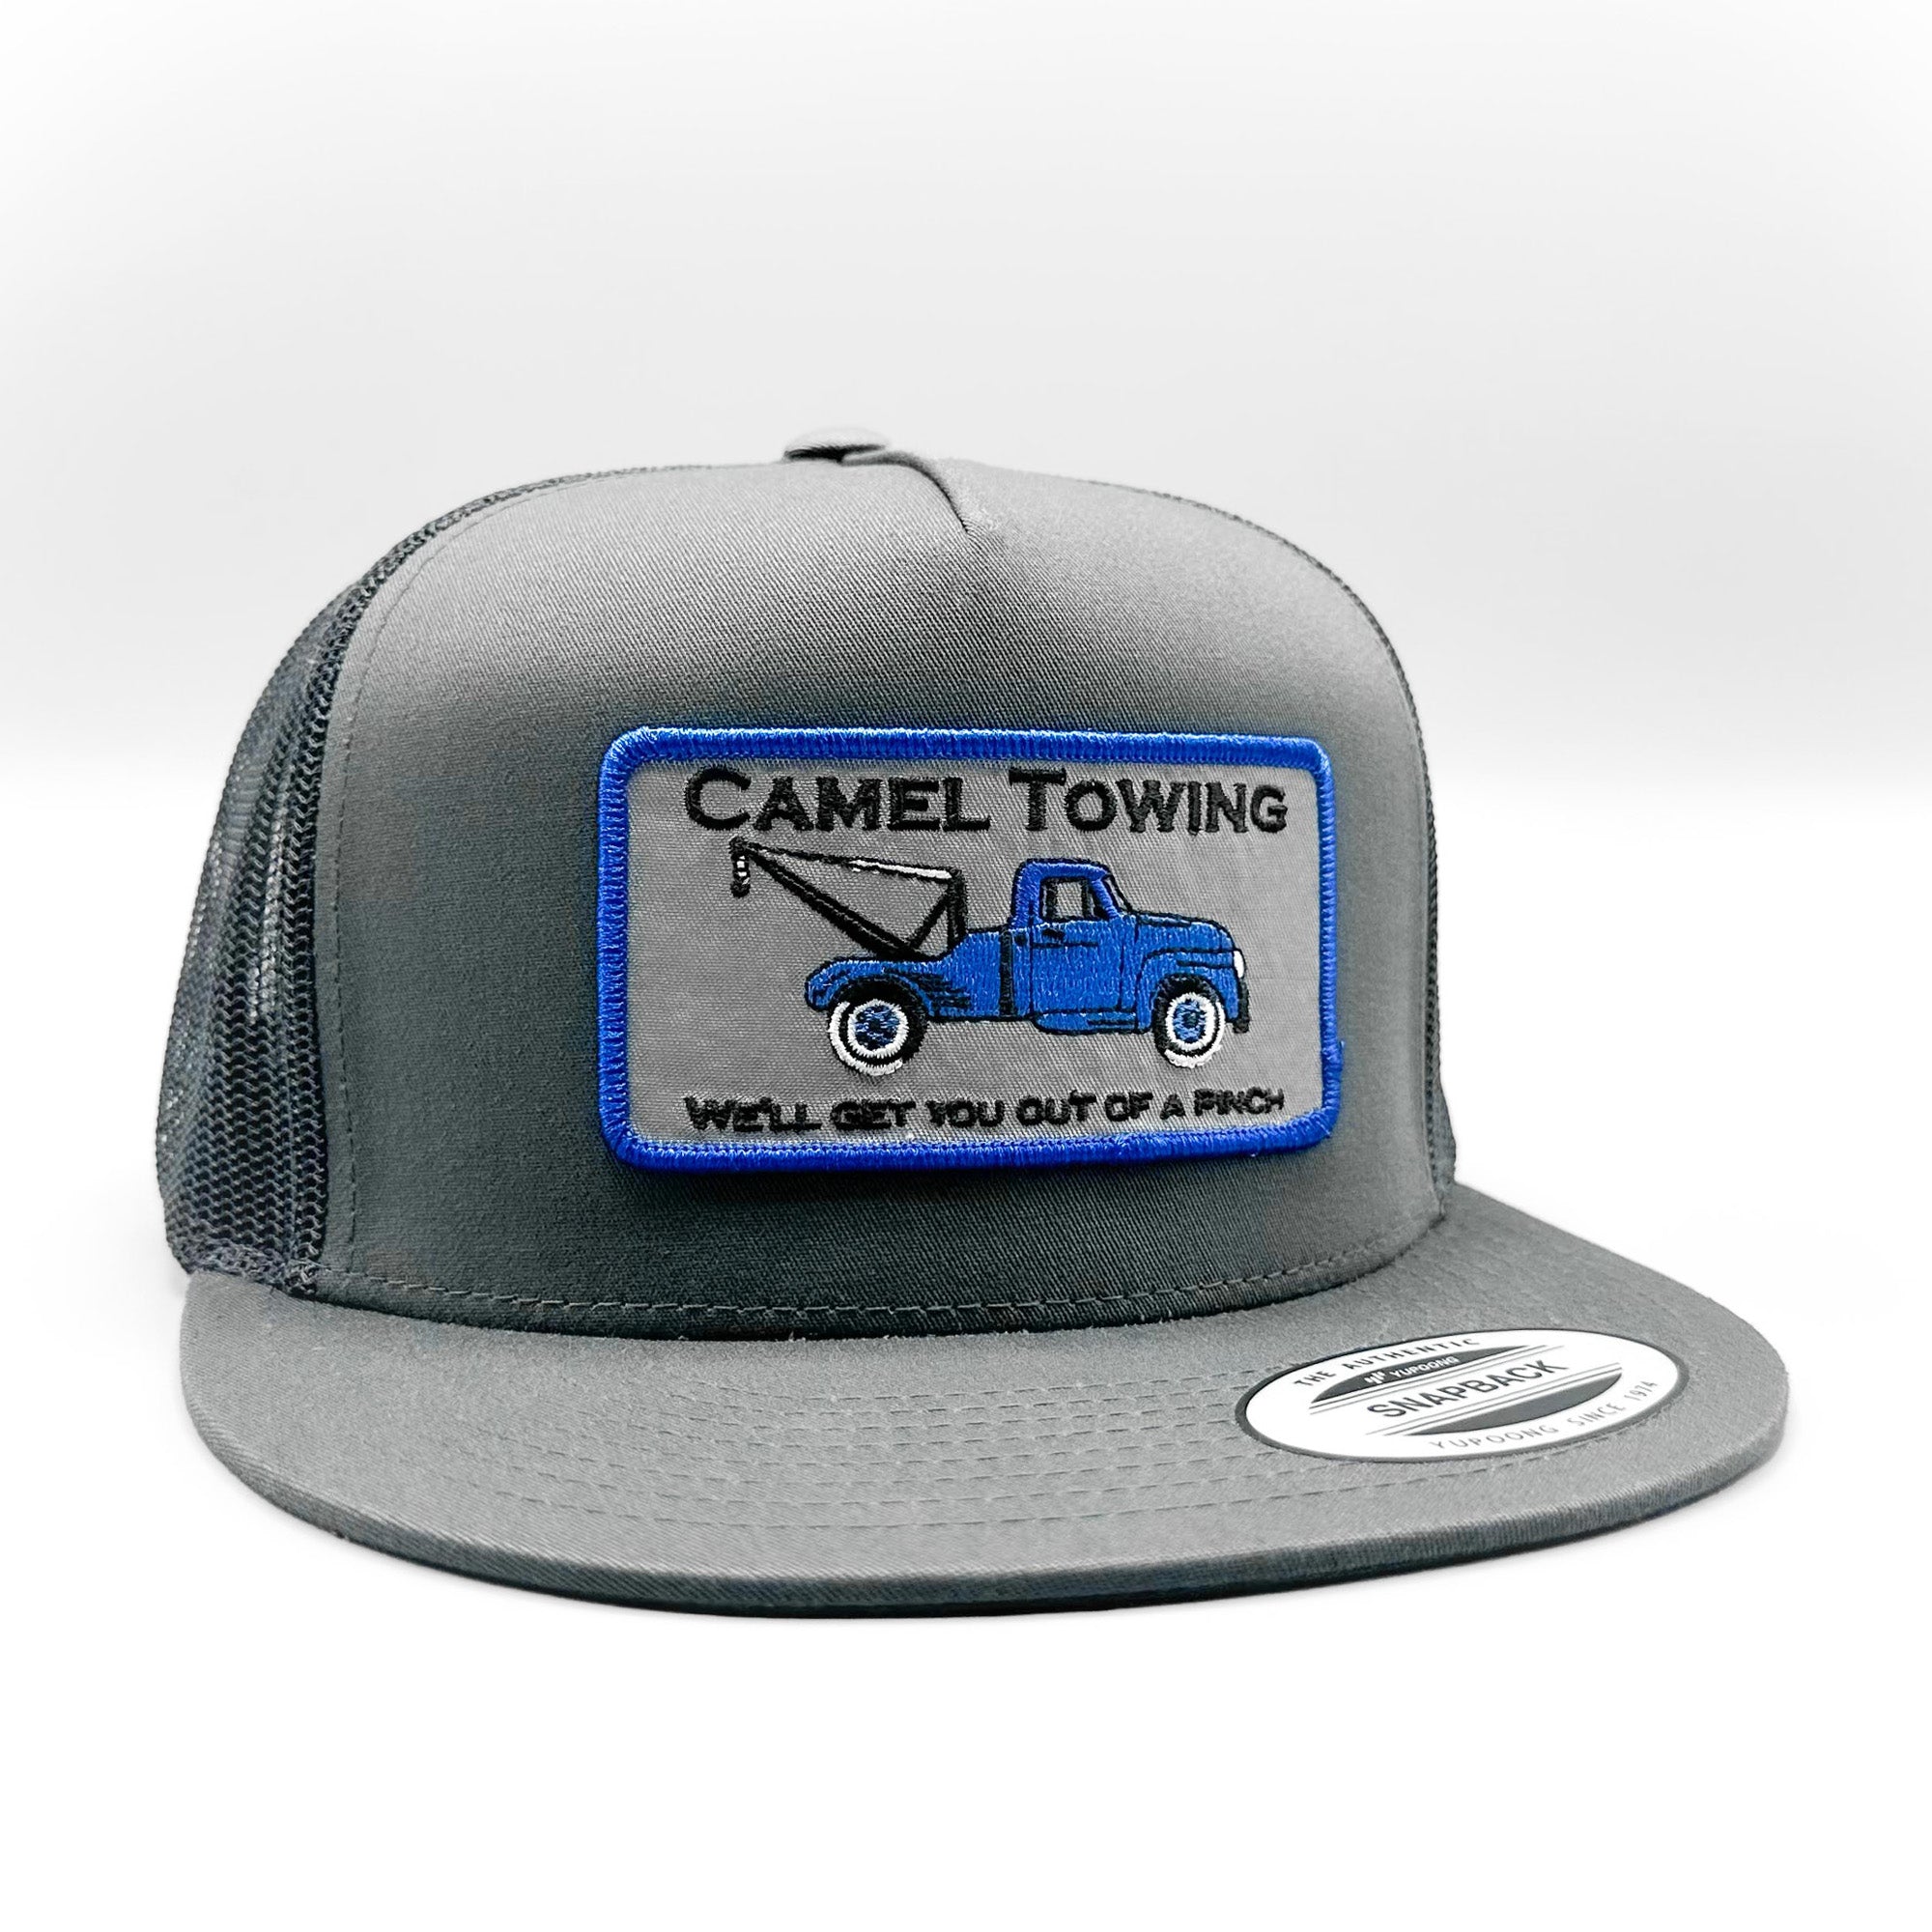 Camel Towing Funny Trucker Hat, Charcoal Gray Yupoong 6006 Hat